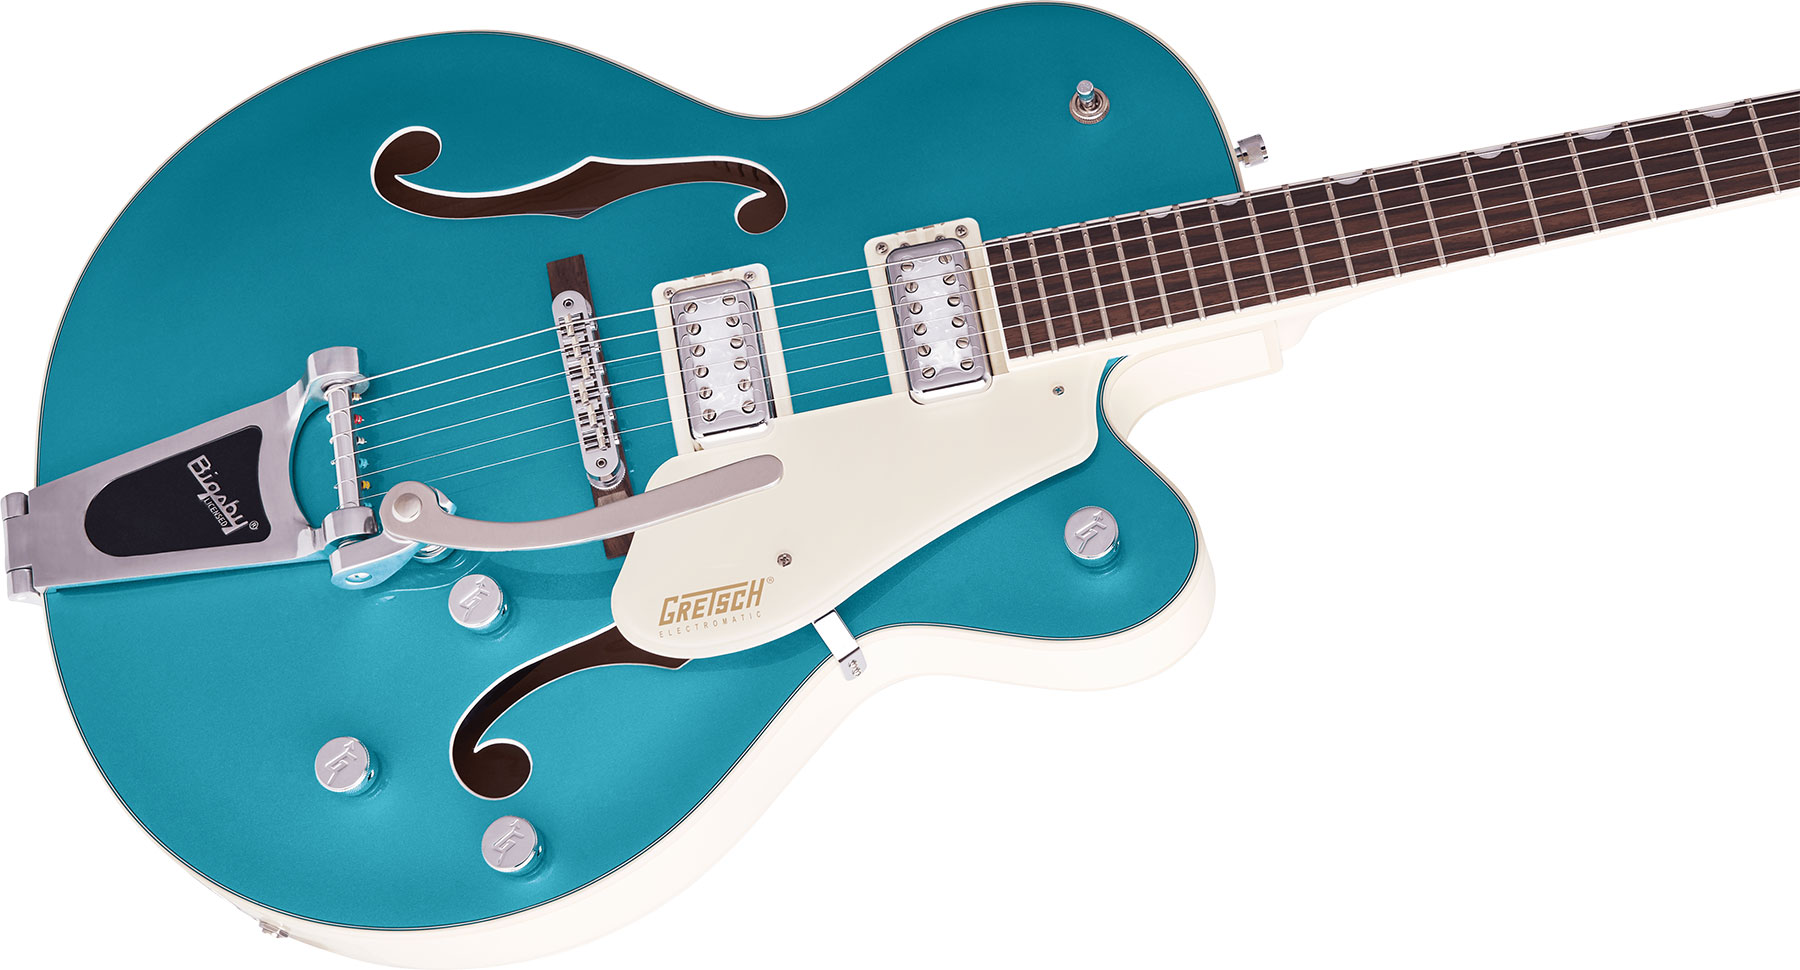 Gretsch G5410t Tri-five Electromatic Hollow Hh Bigsby Rw - Two-tone Ocean Turquoise/vintage White - Guitare Électrique 1/2 Caisse - Variation 2